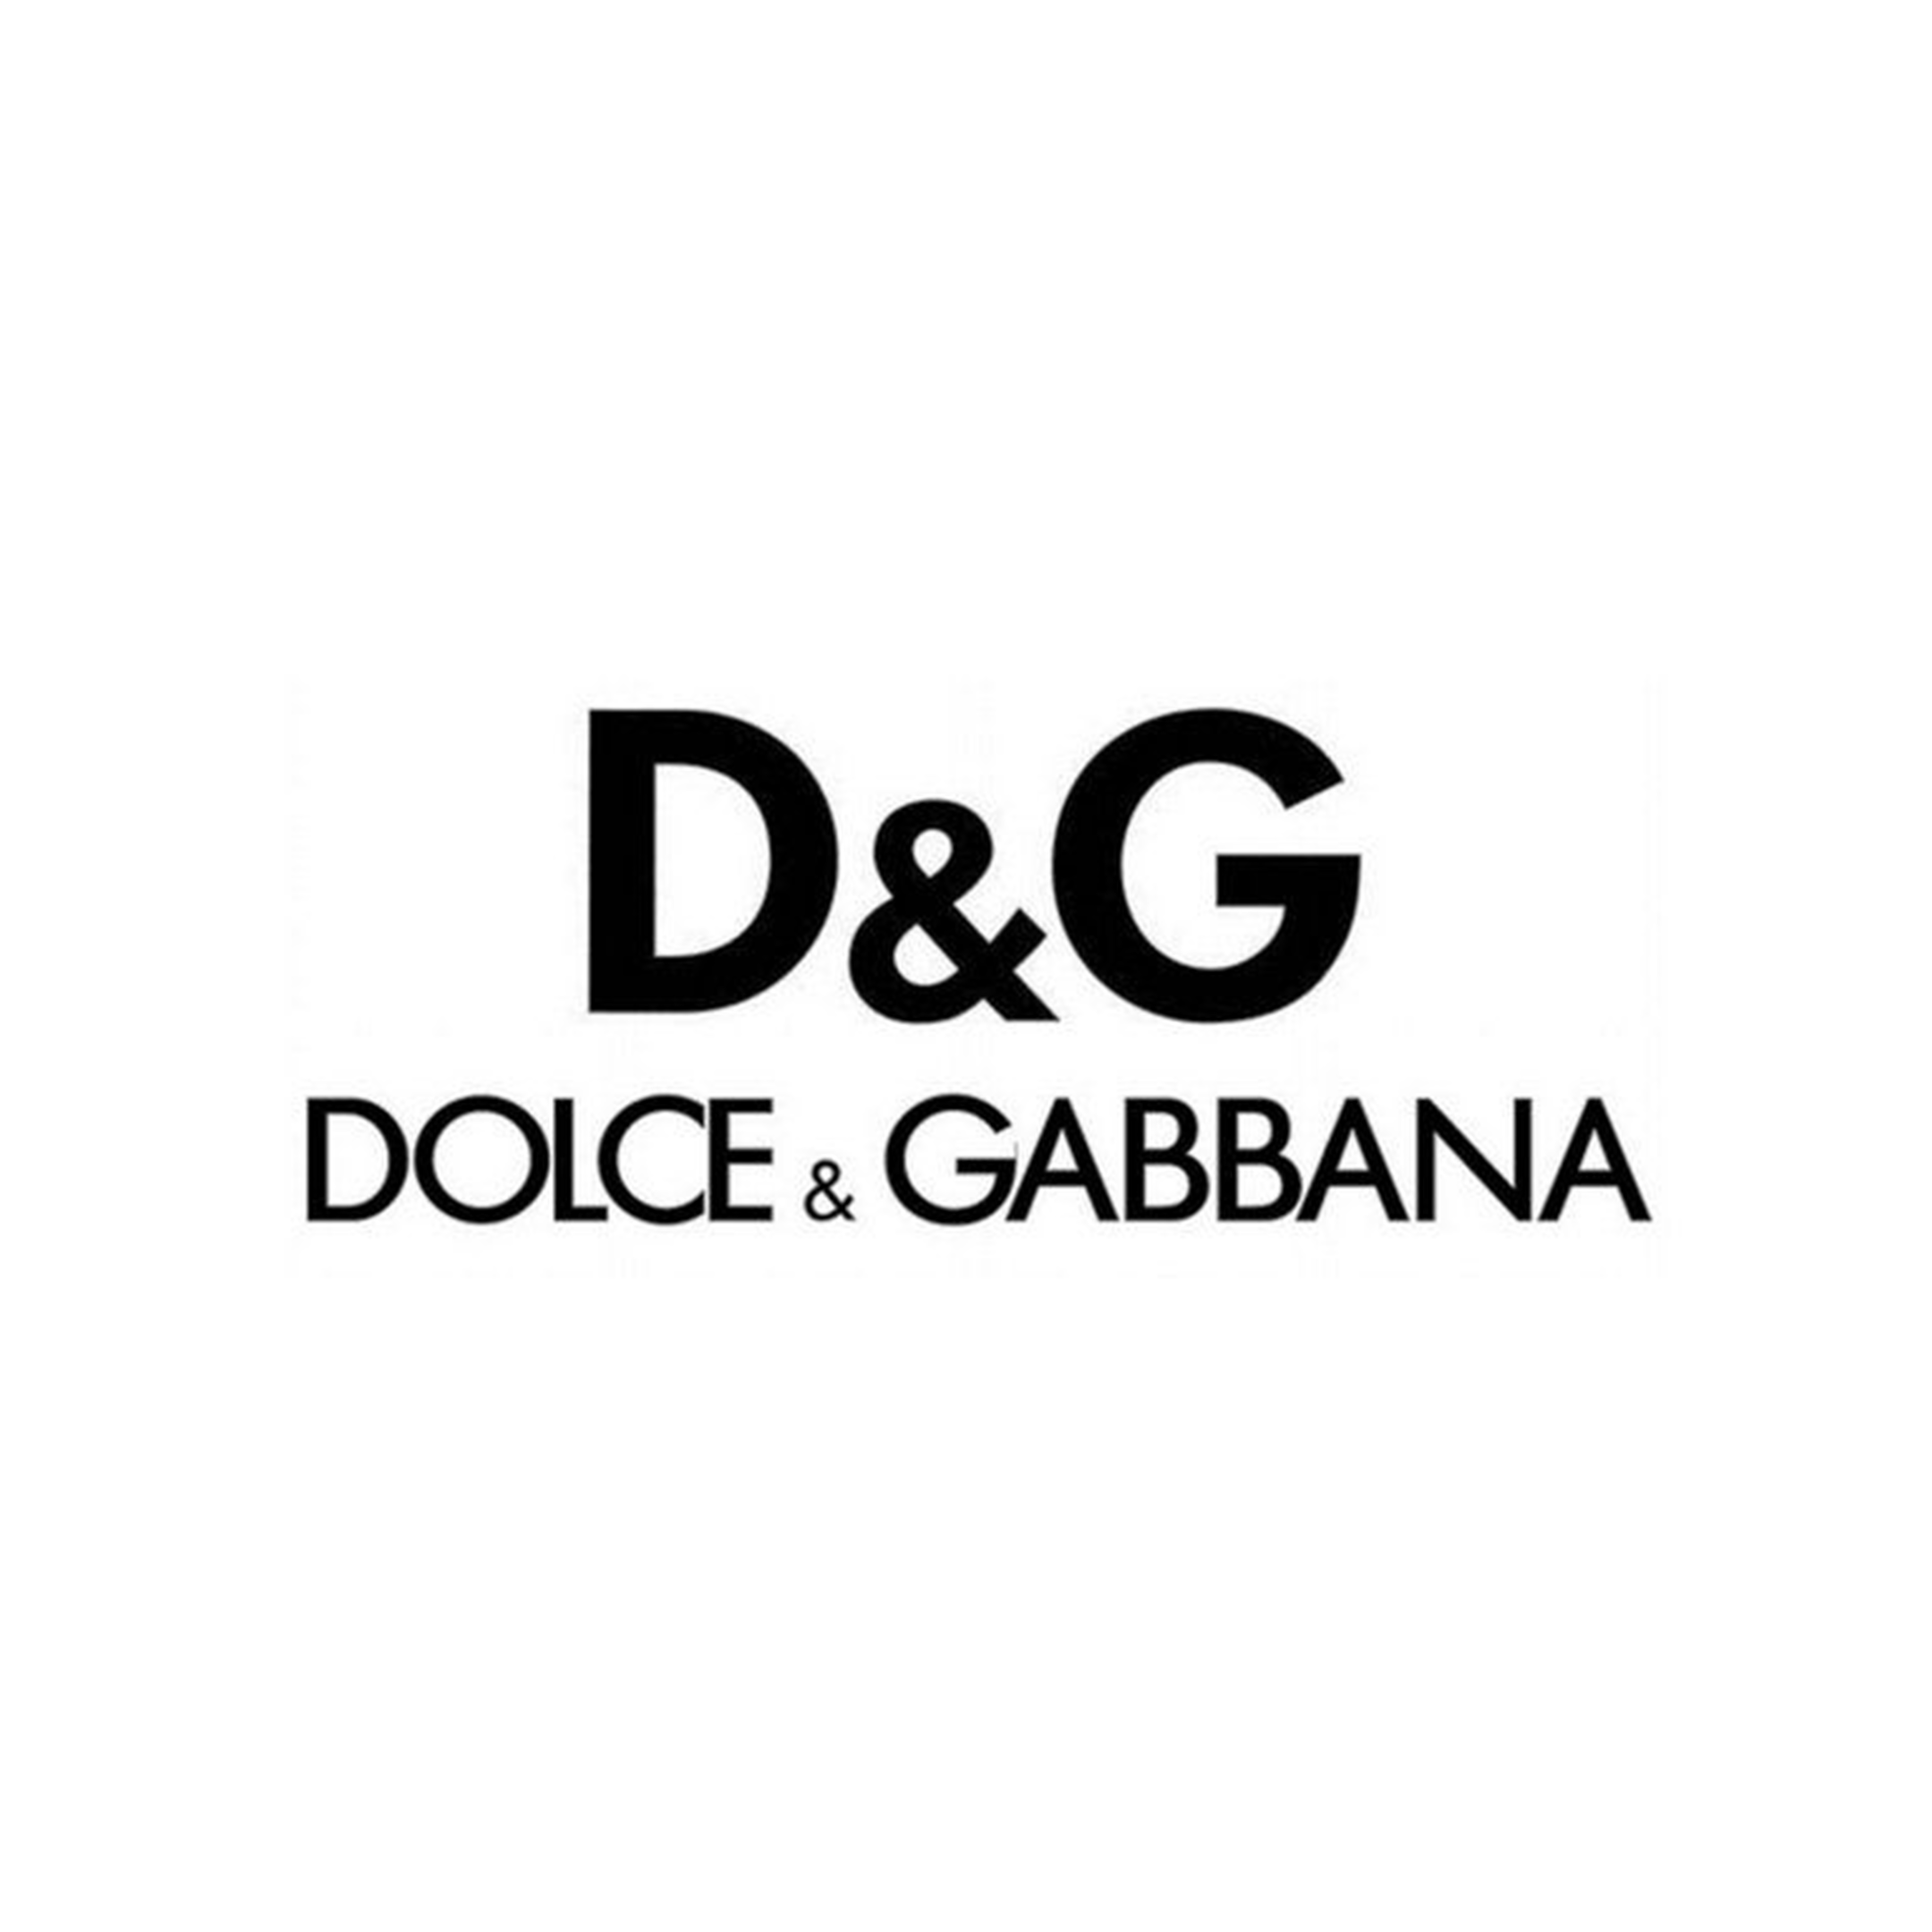 Dolce & Gabbana Perfume and Cologne, Buy Dolce & Gabbana Fragrances Online